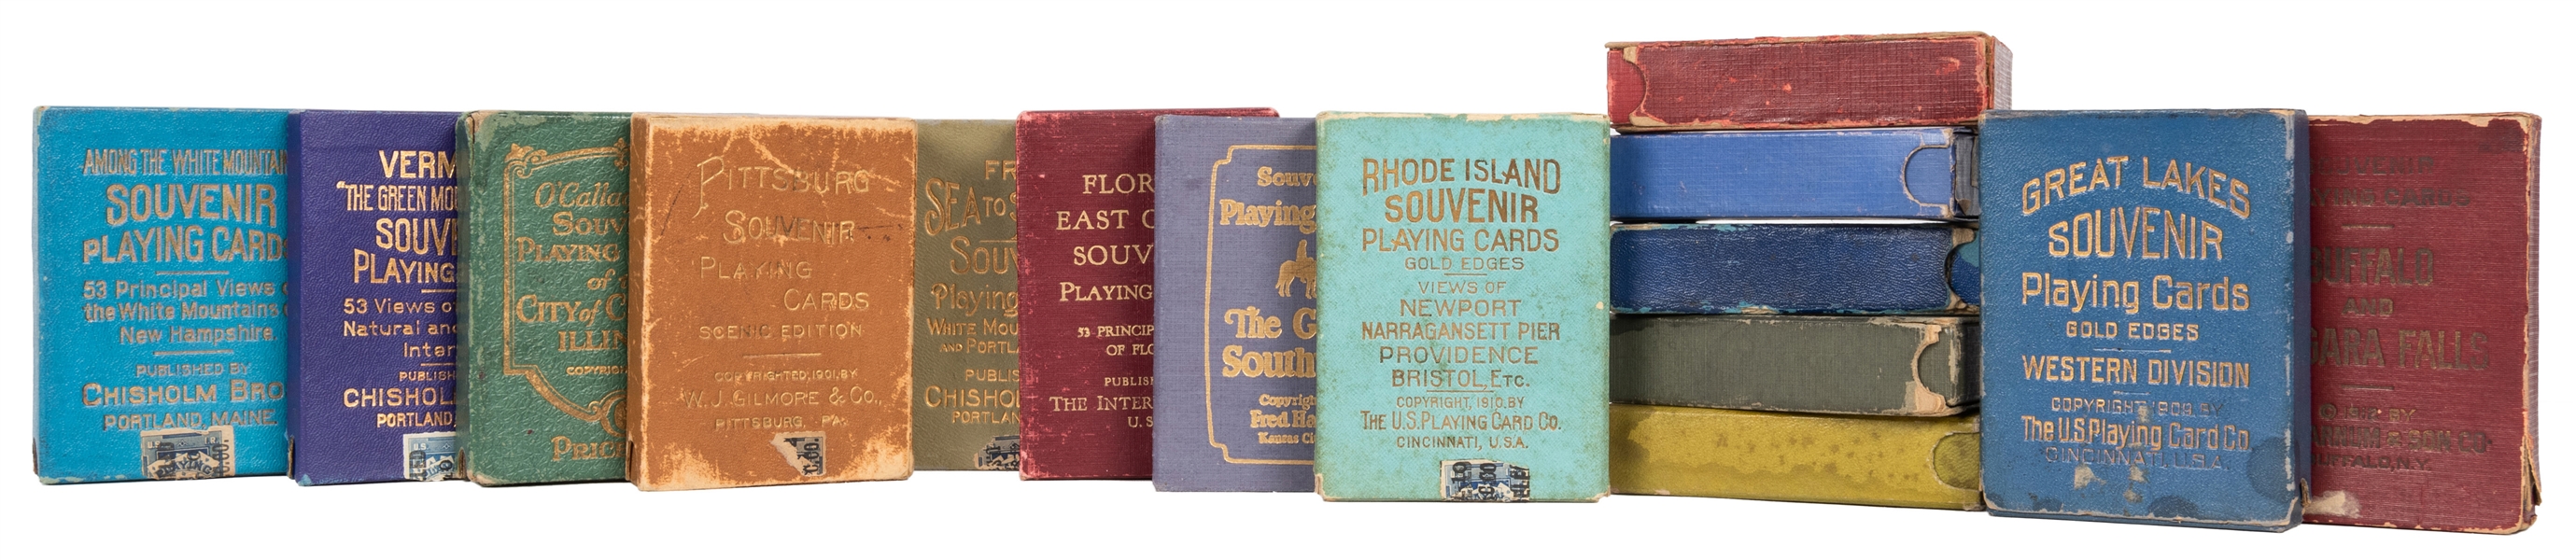 Lot of American Travel Souvenir Playing Card Decks. Florida, New England, and Other Locations.